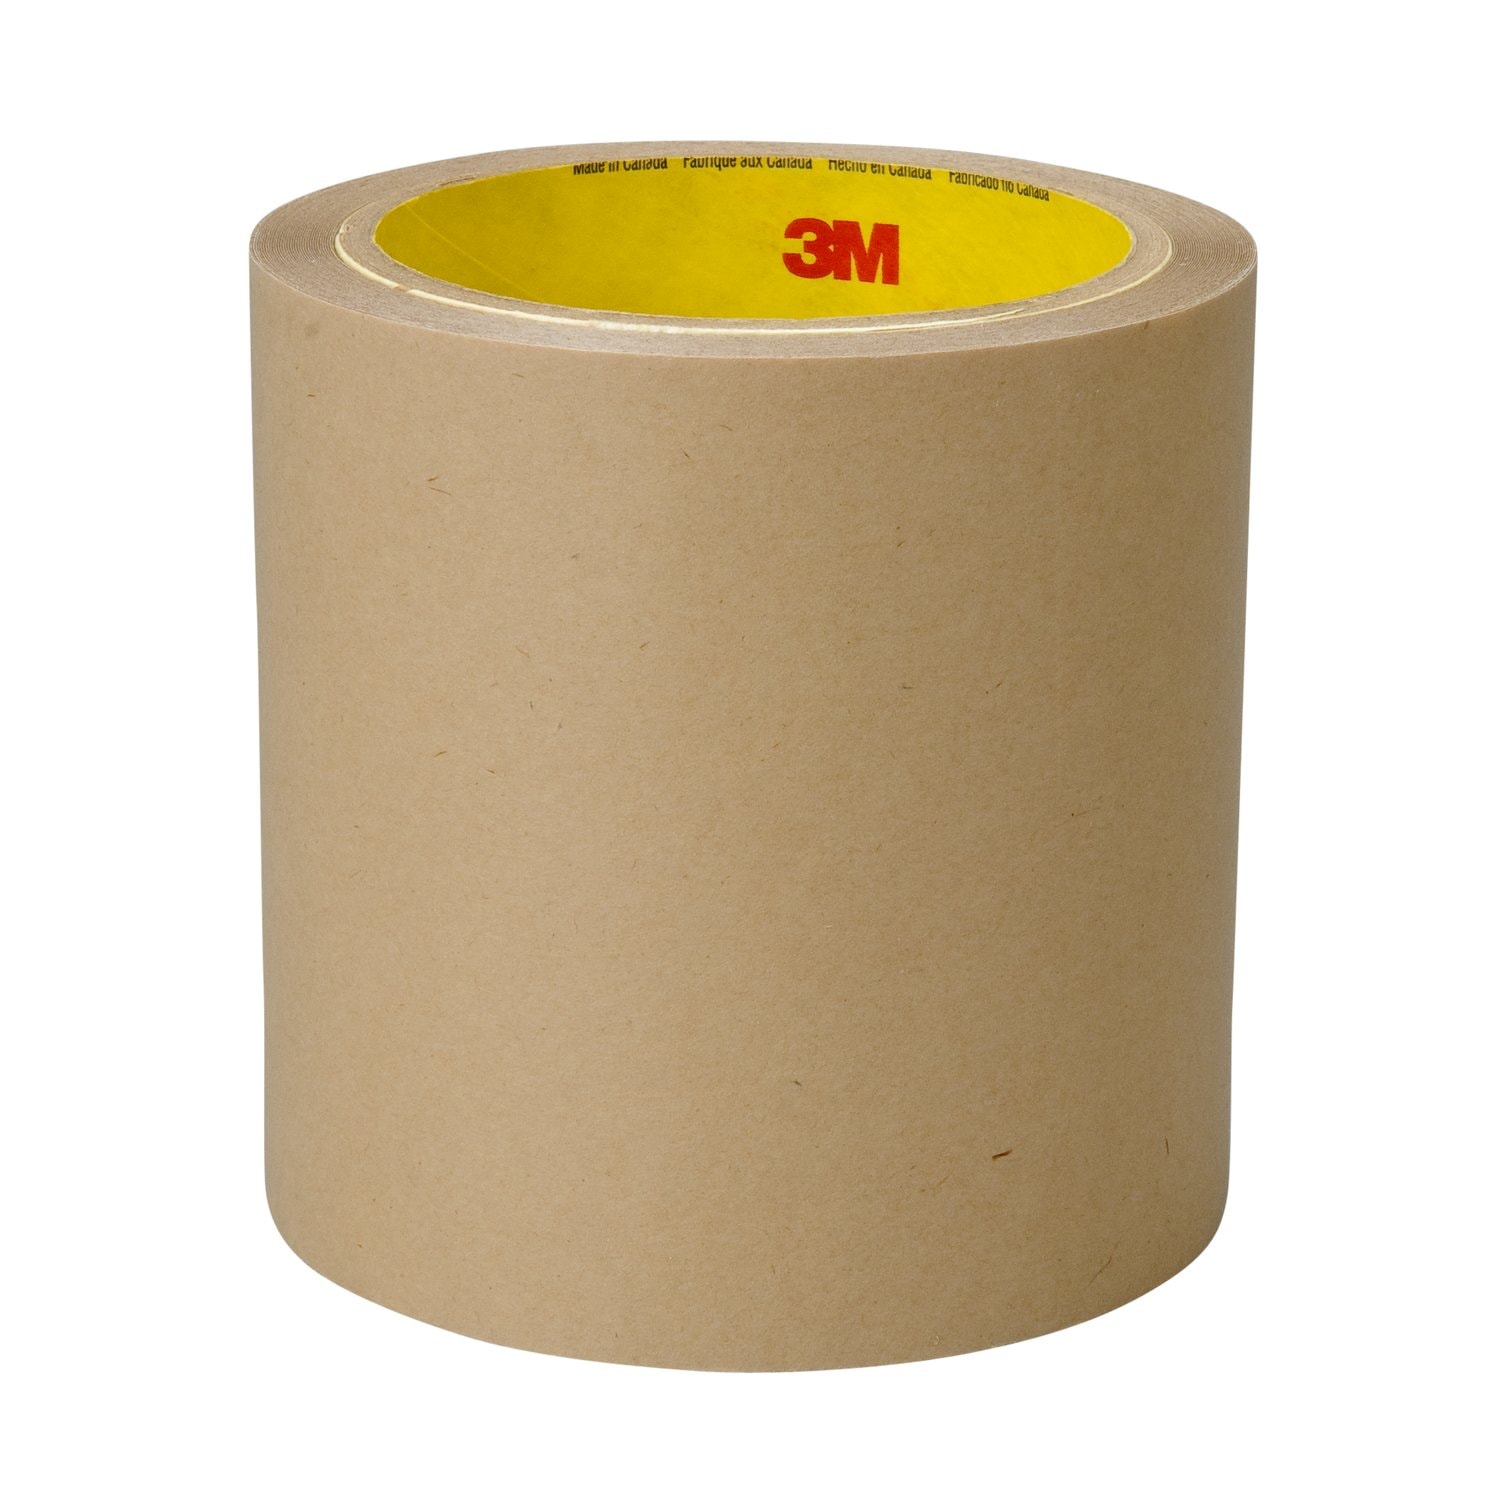 7010300201 - 3M Double Coated Tape 9500PC, Clear, 4 in x 36 yd, 5.6 mil, 8 rolls per
case